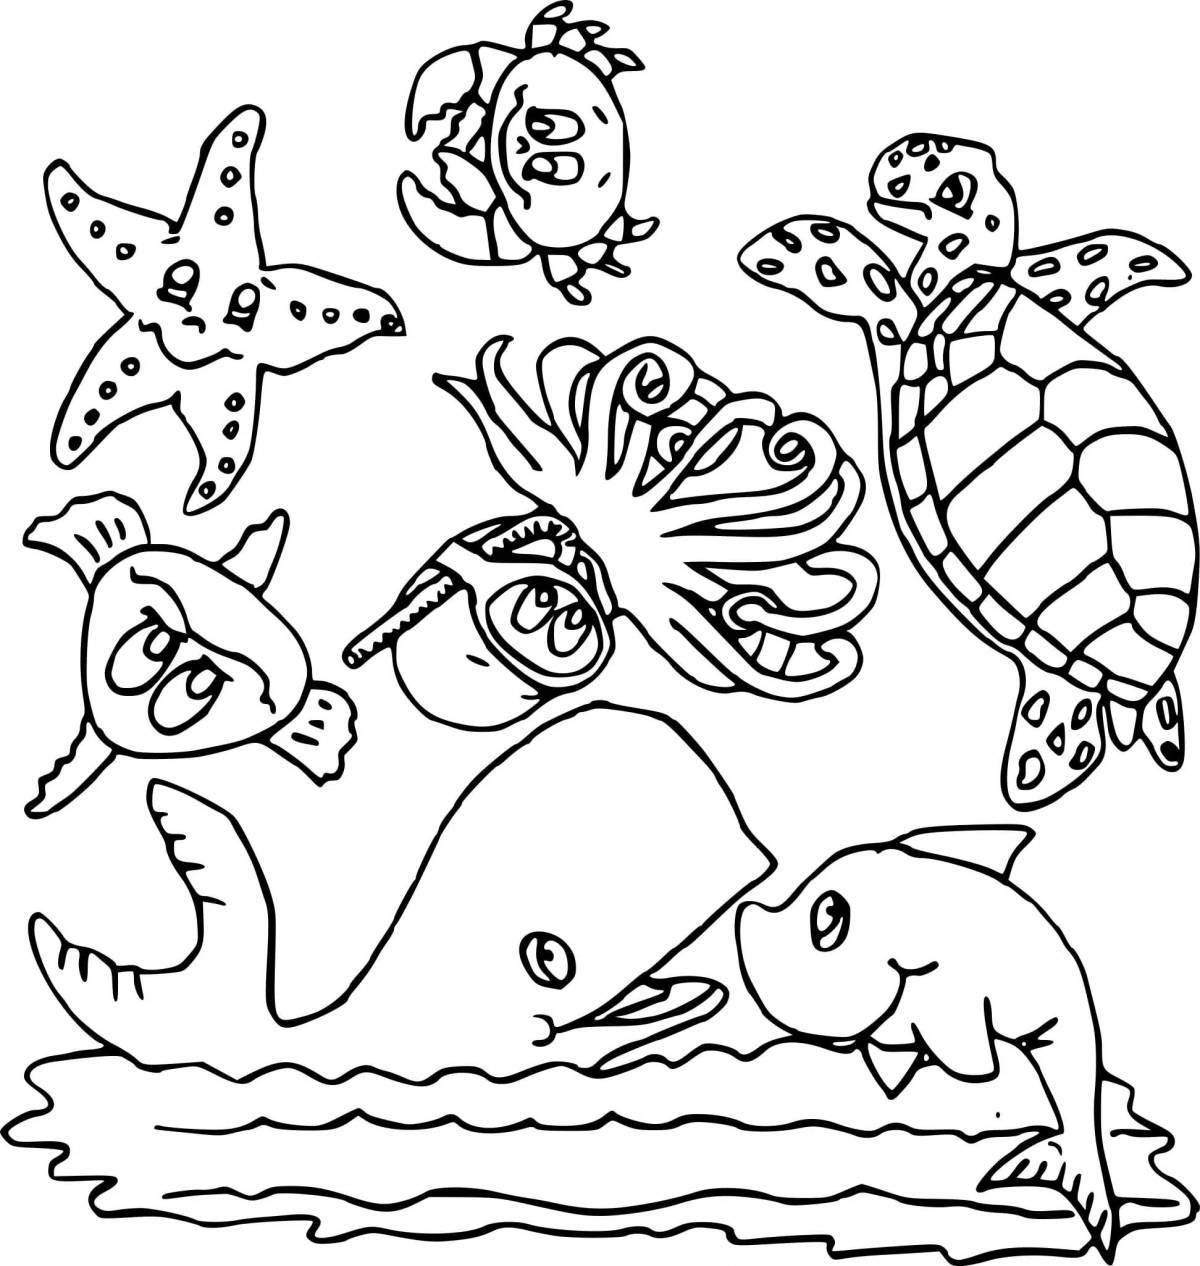 Fascinating marine life coloring book for kids 5-6 years old